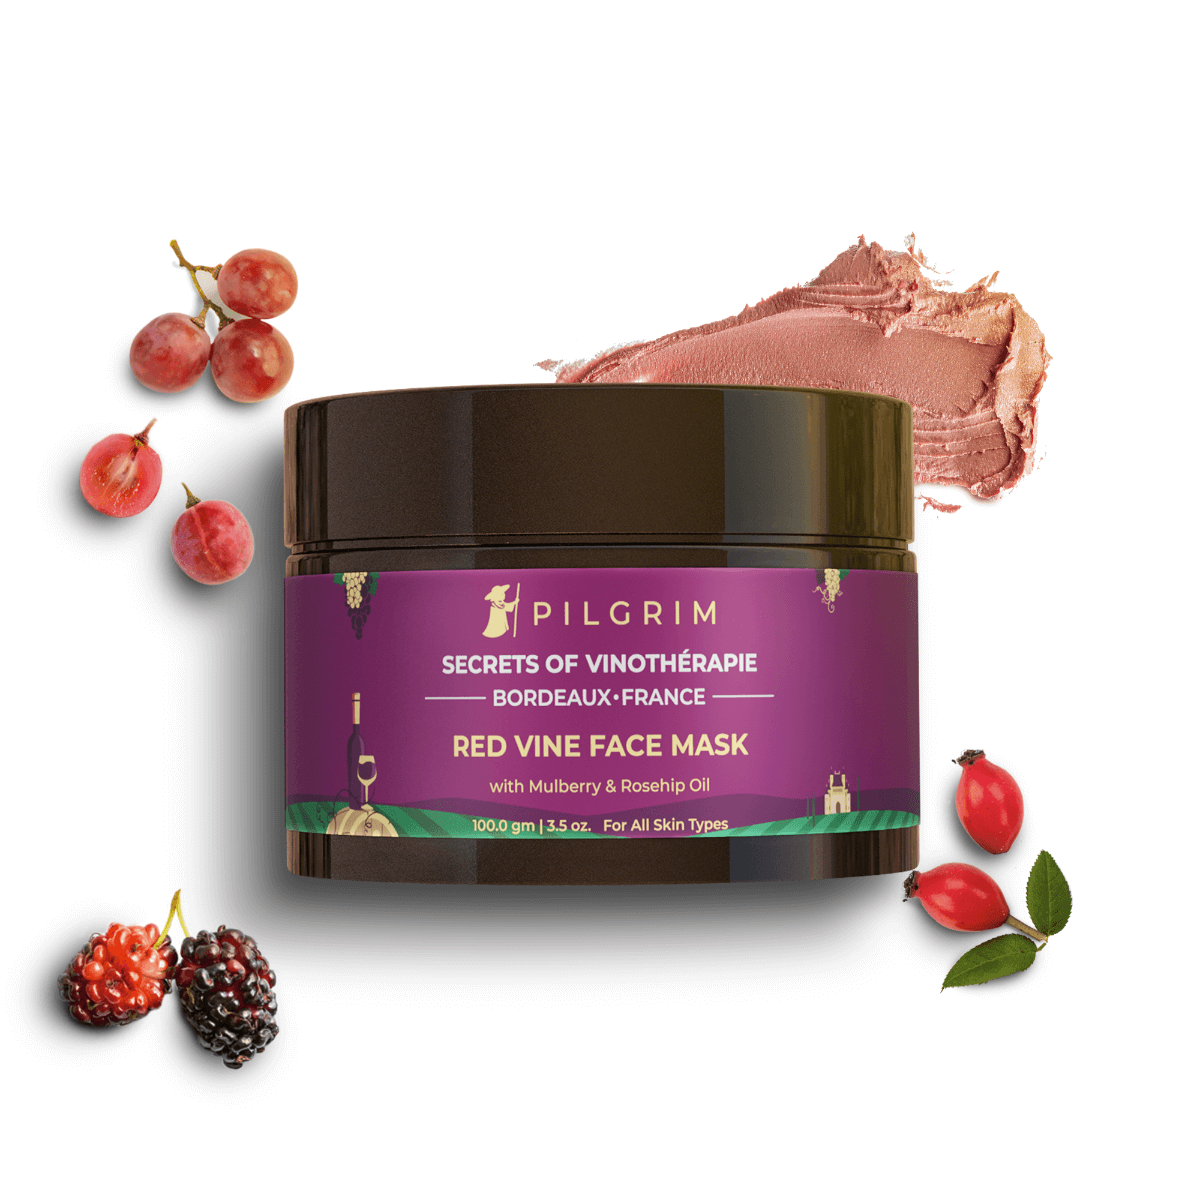 Red Vine Face Mask with Mulberry & Rosehip Oil 